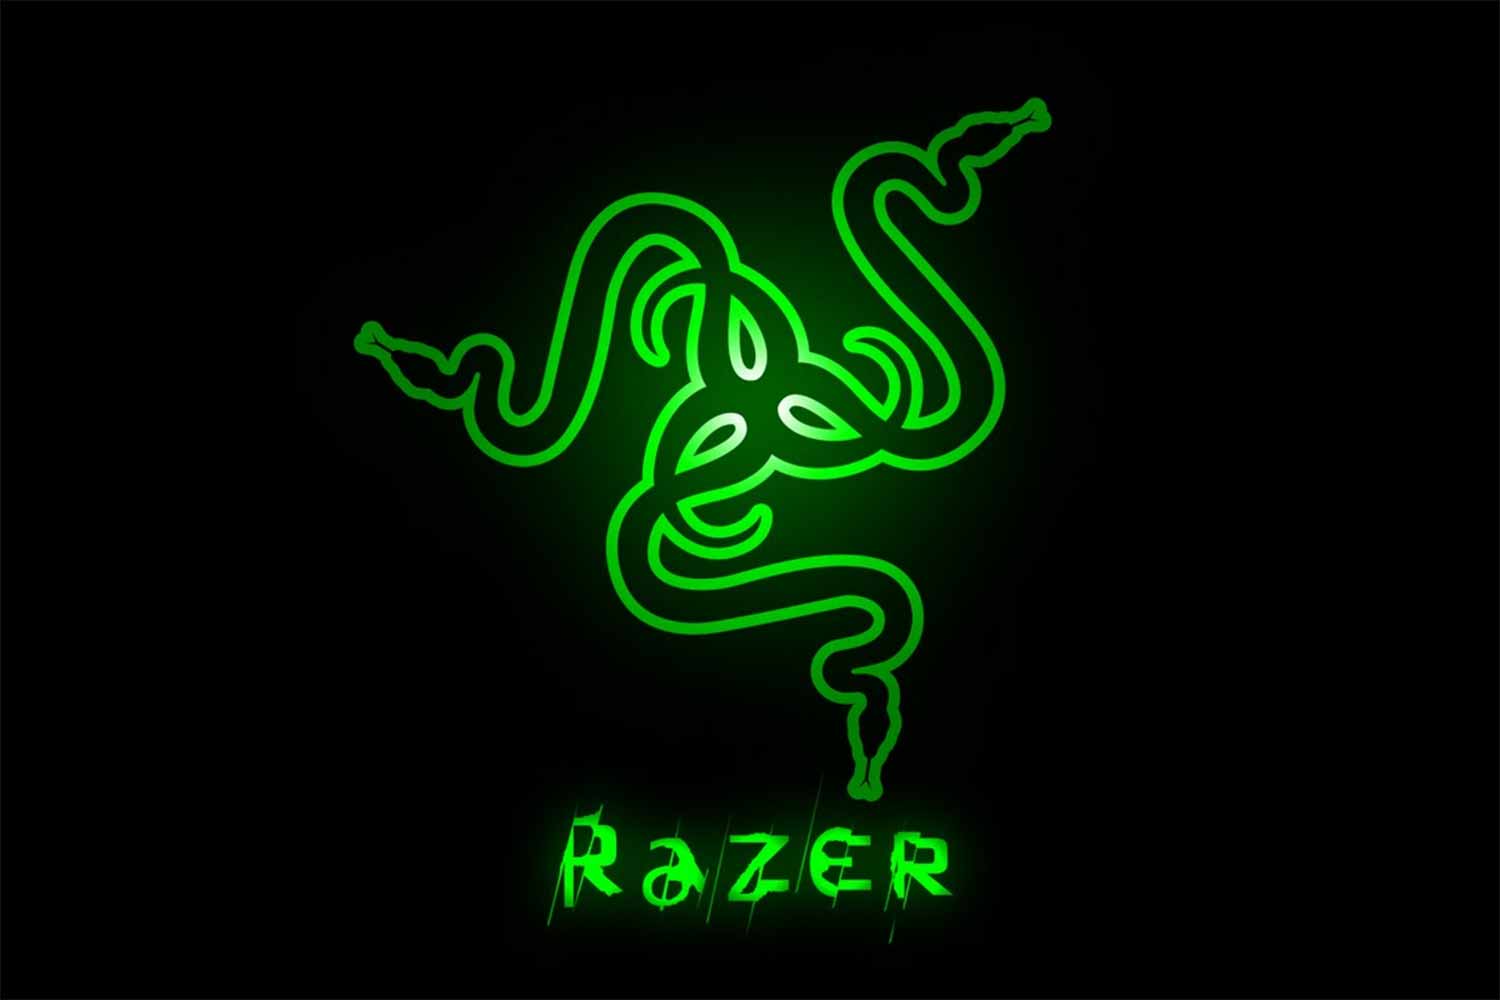 Razer Acquires Ouya, Keeps Name but Drops Hardware